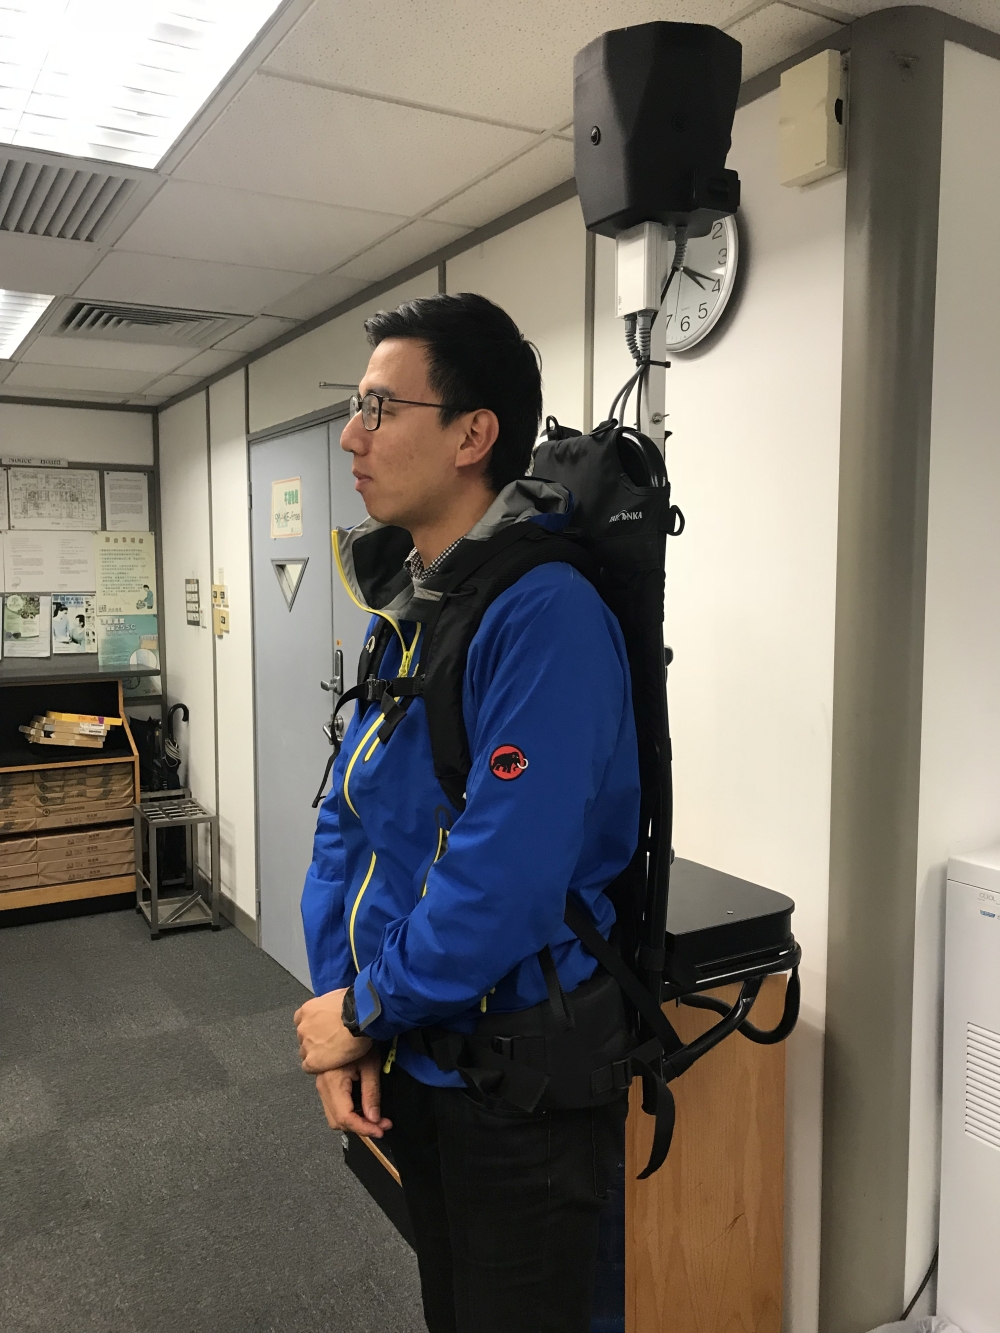 In recent years, the Backpack Mobile Mapping System has been used by the Lands Department to assist in land administration and